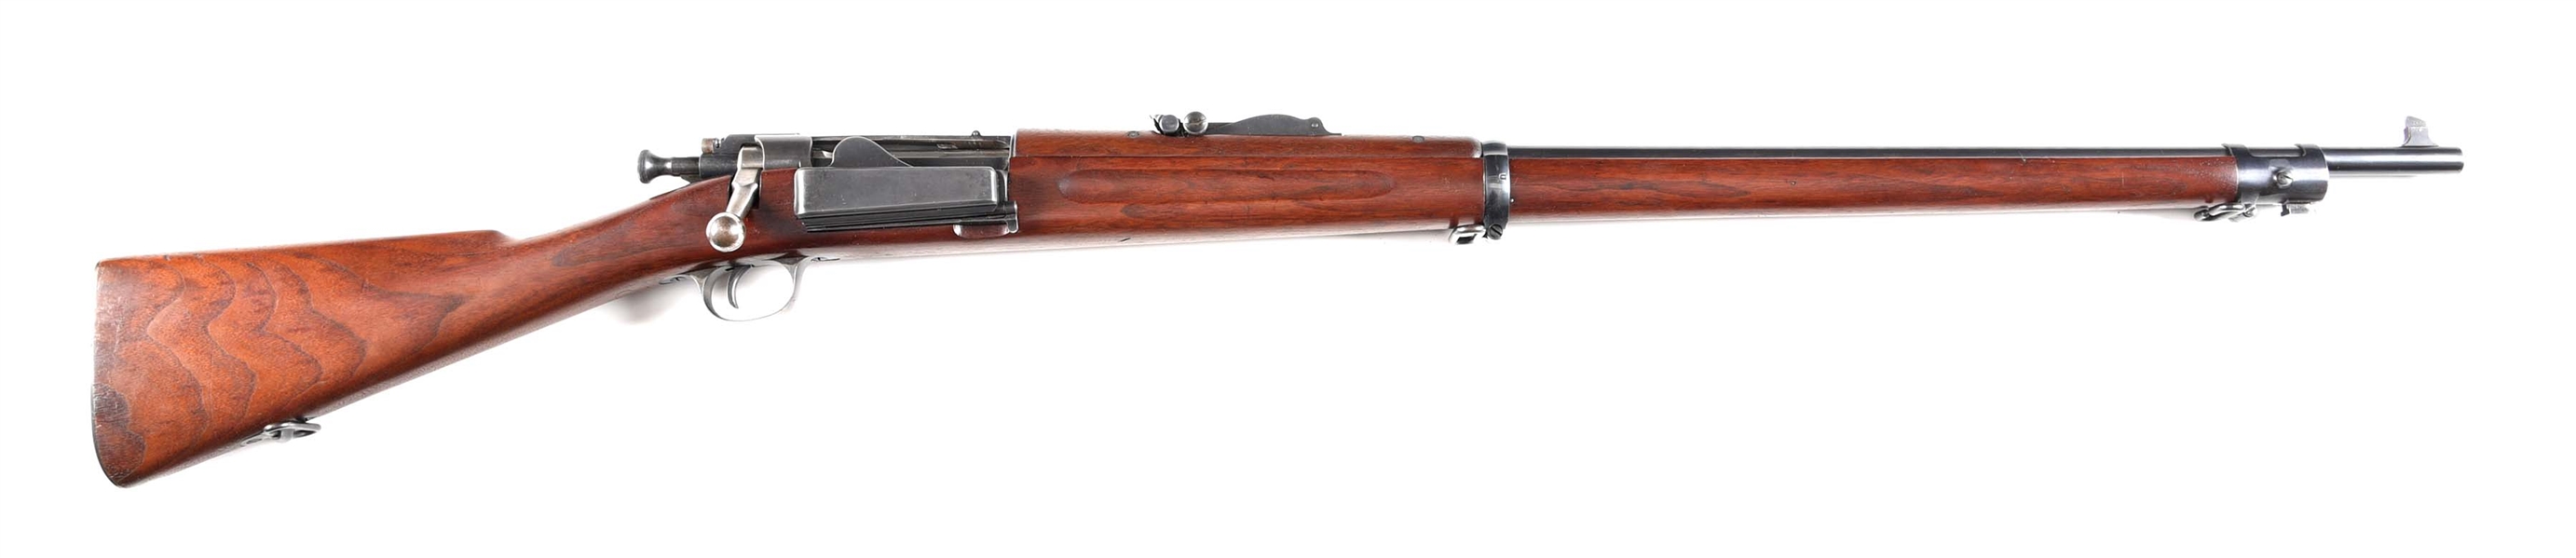 (C) HIGH CONDITION US SPRINGFIELD MODEL 1898 KRAG BOLT ACTION RIFLE.